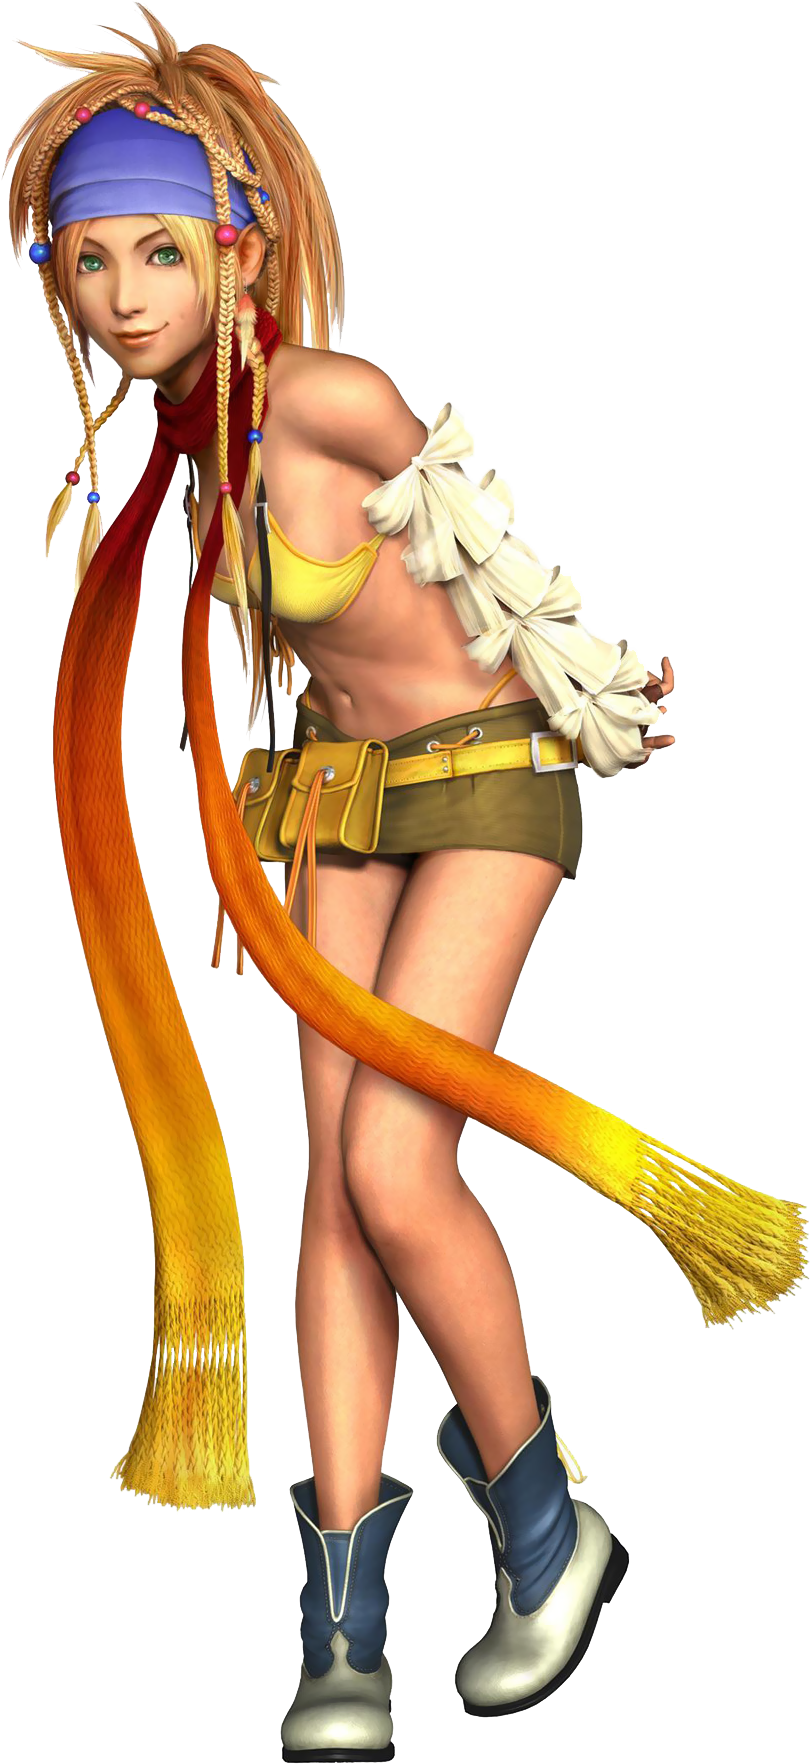 Rikku+(http-%3A%3Aimg1.wikia.nocookie.net%3A__cb20130626174700%3Afinalfantasy%3Aimages%3A2%3A28%3AFFX-2_HD_Rikku_Render.png).png